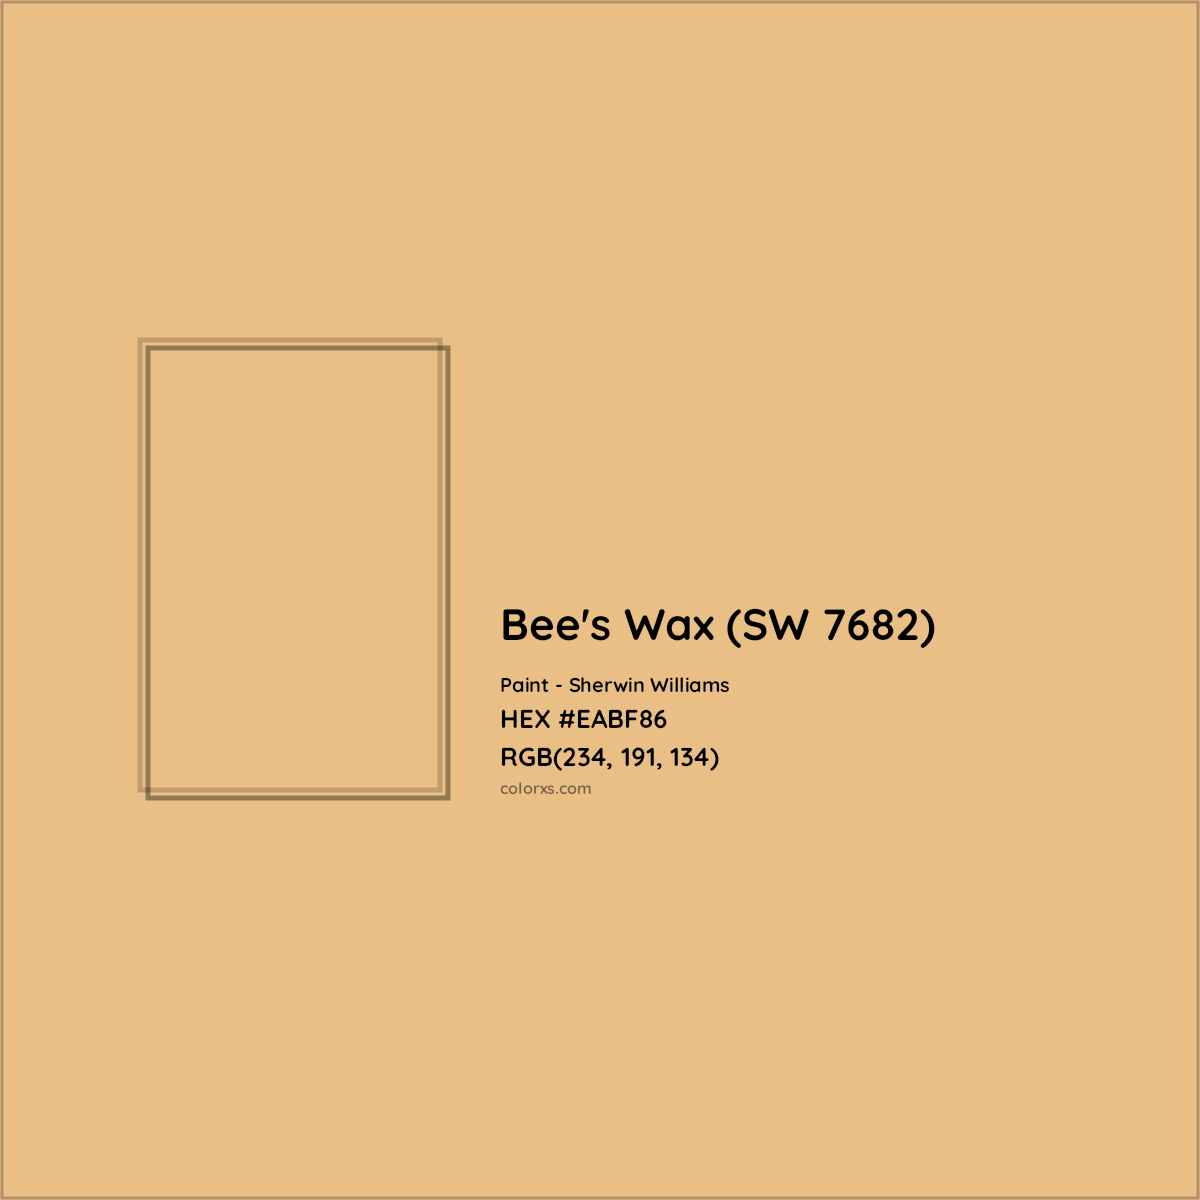 HEX #EABF86 Bee's Wax (SW 7682) Paint Sherwin Williams - Color Code